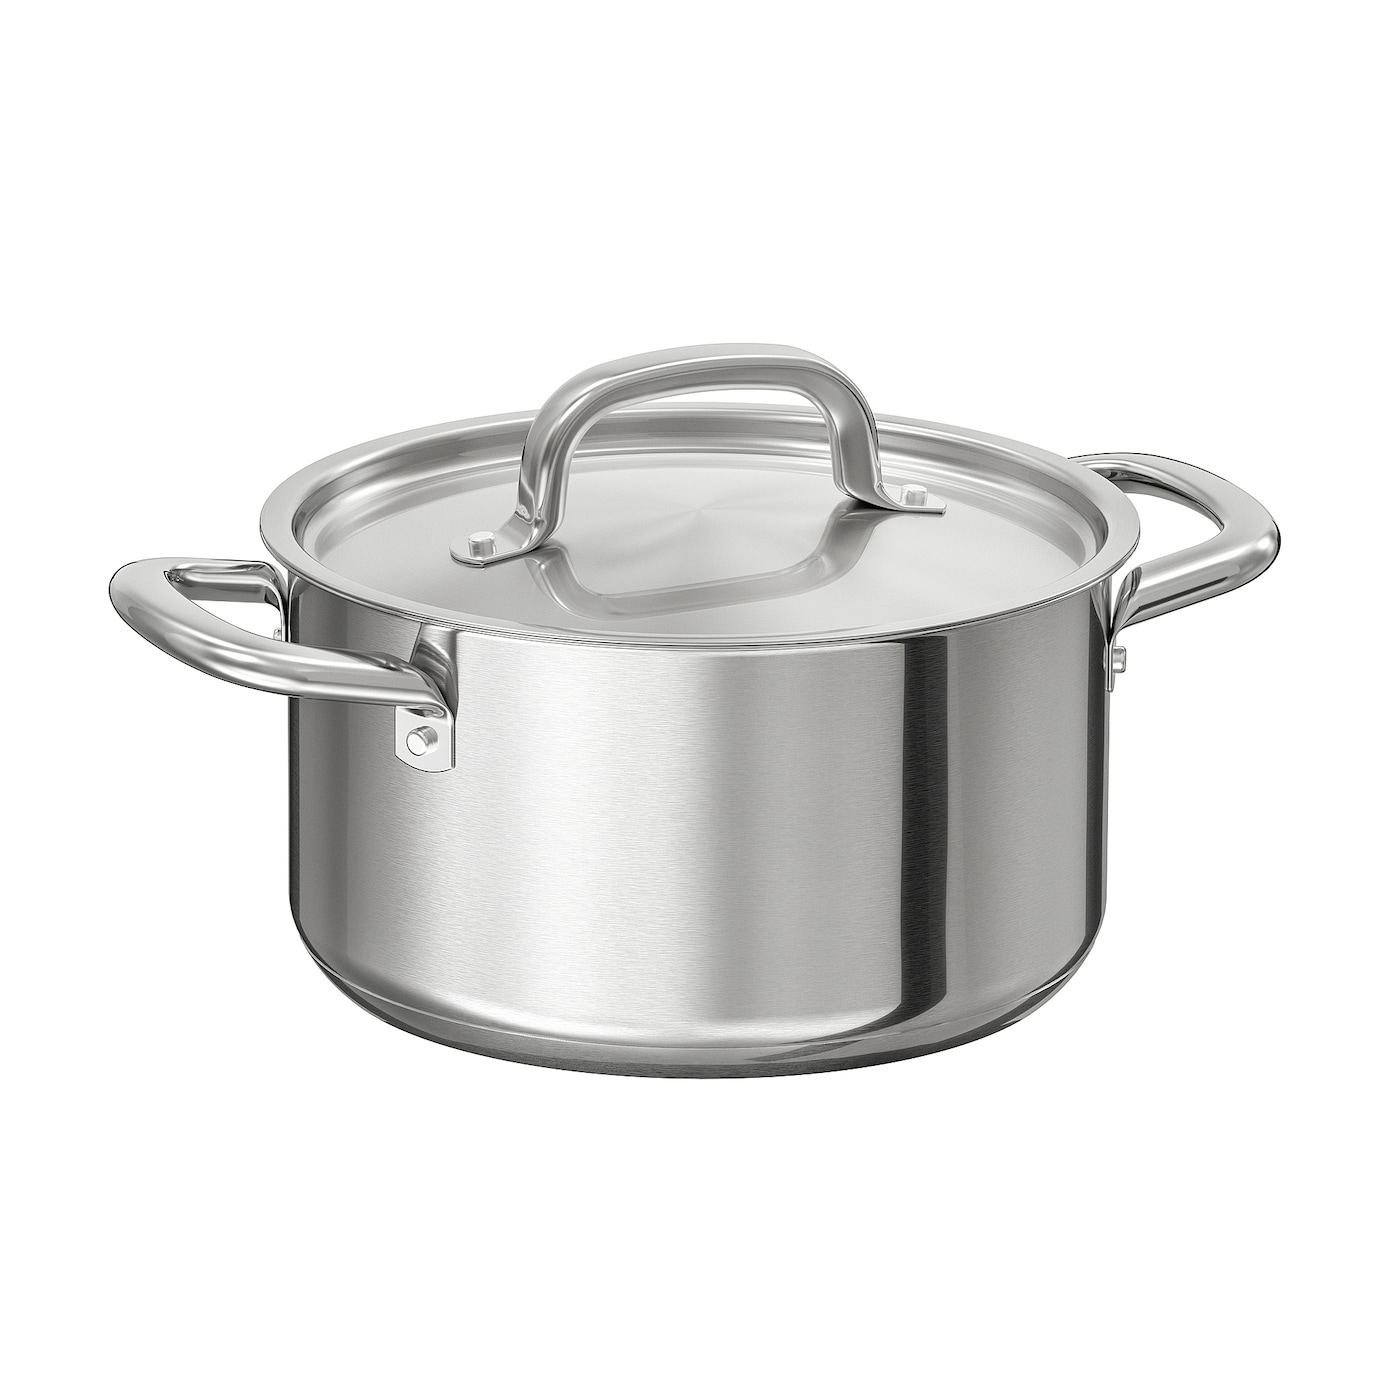 ikea-365-pot-with-lid-stainless-steel__1006171_pe825756_s5.jpg